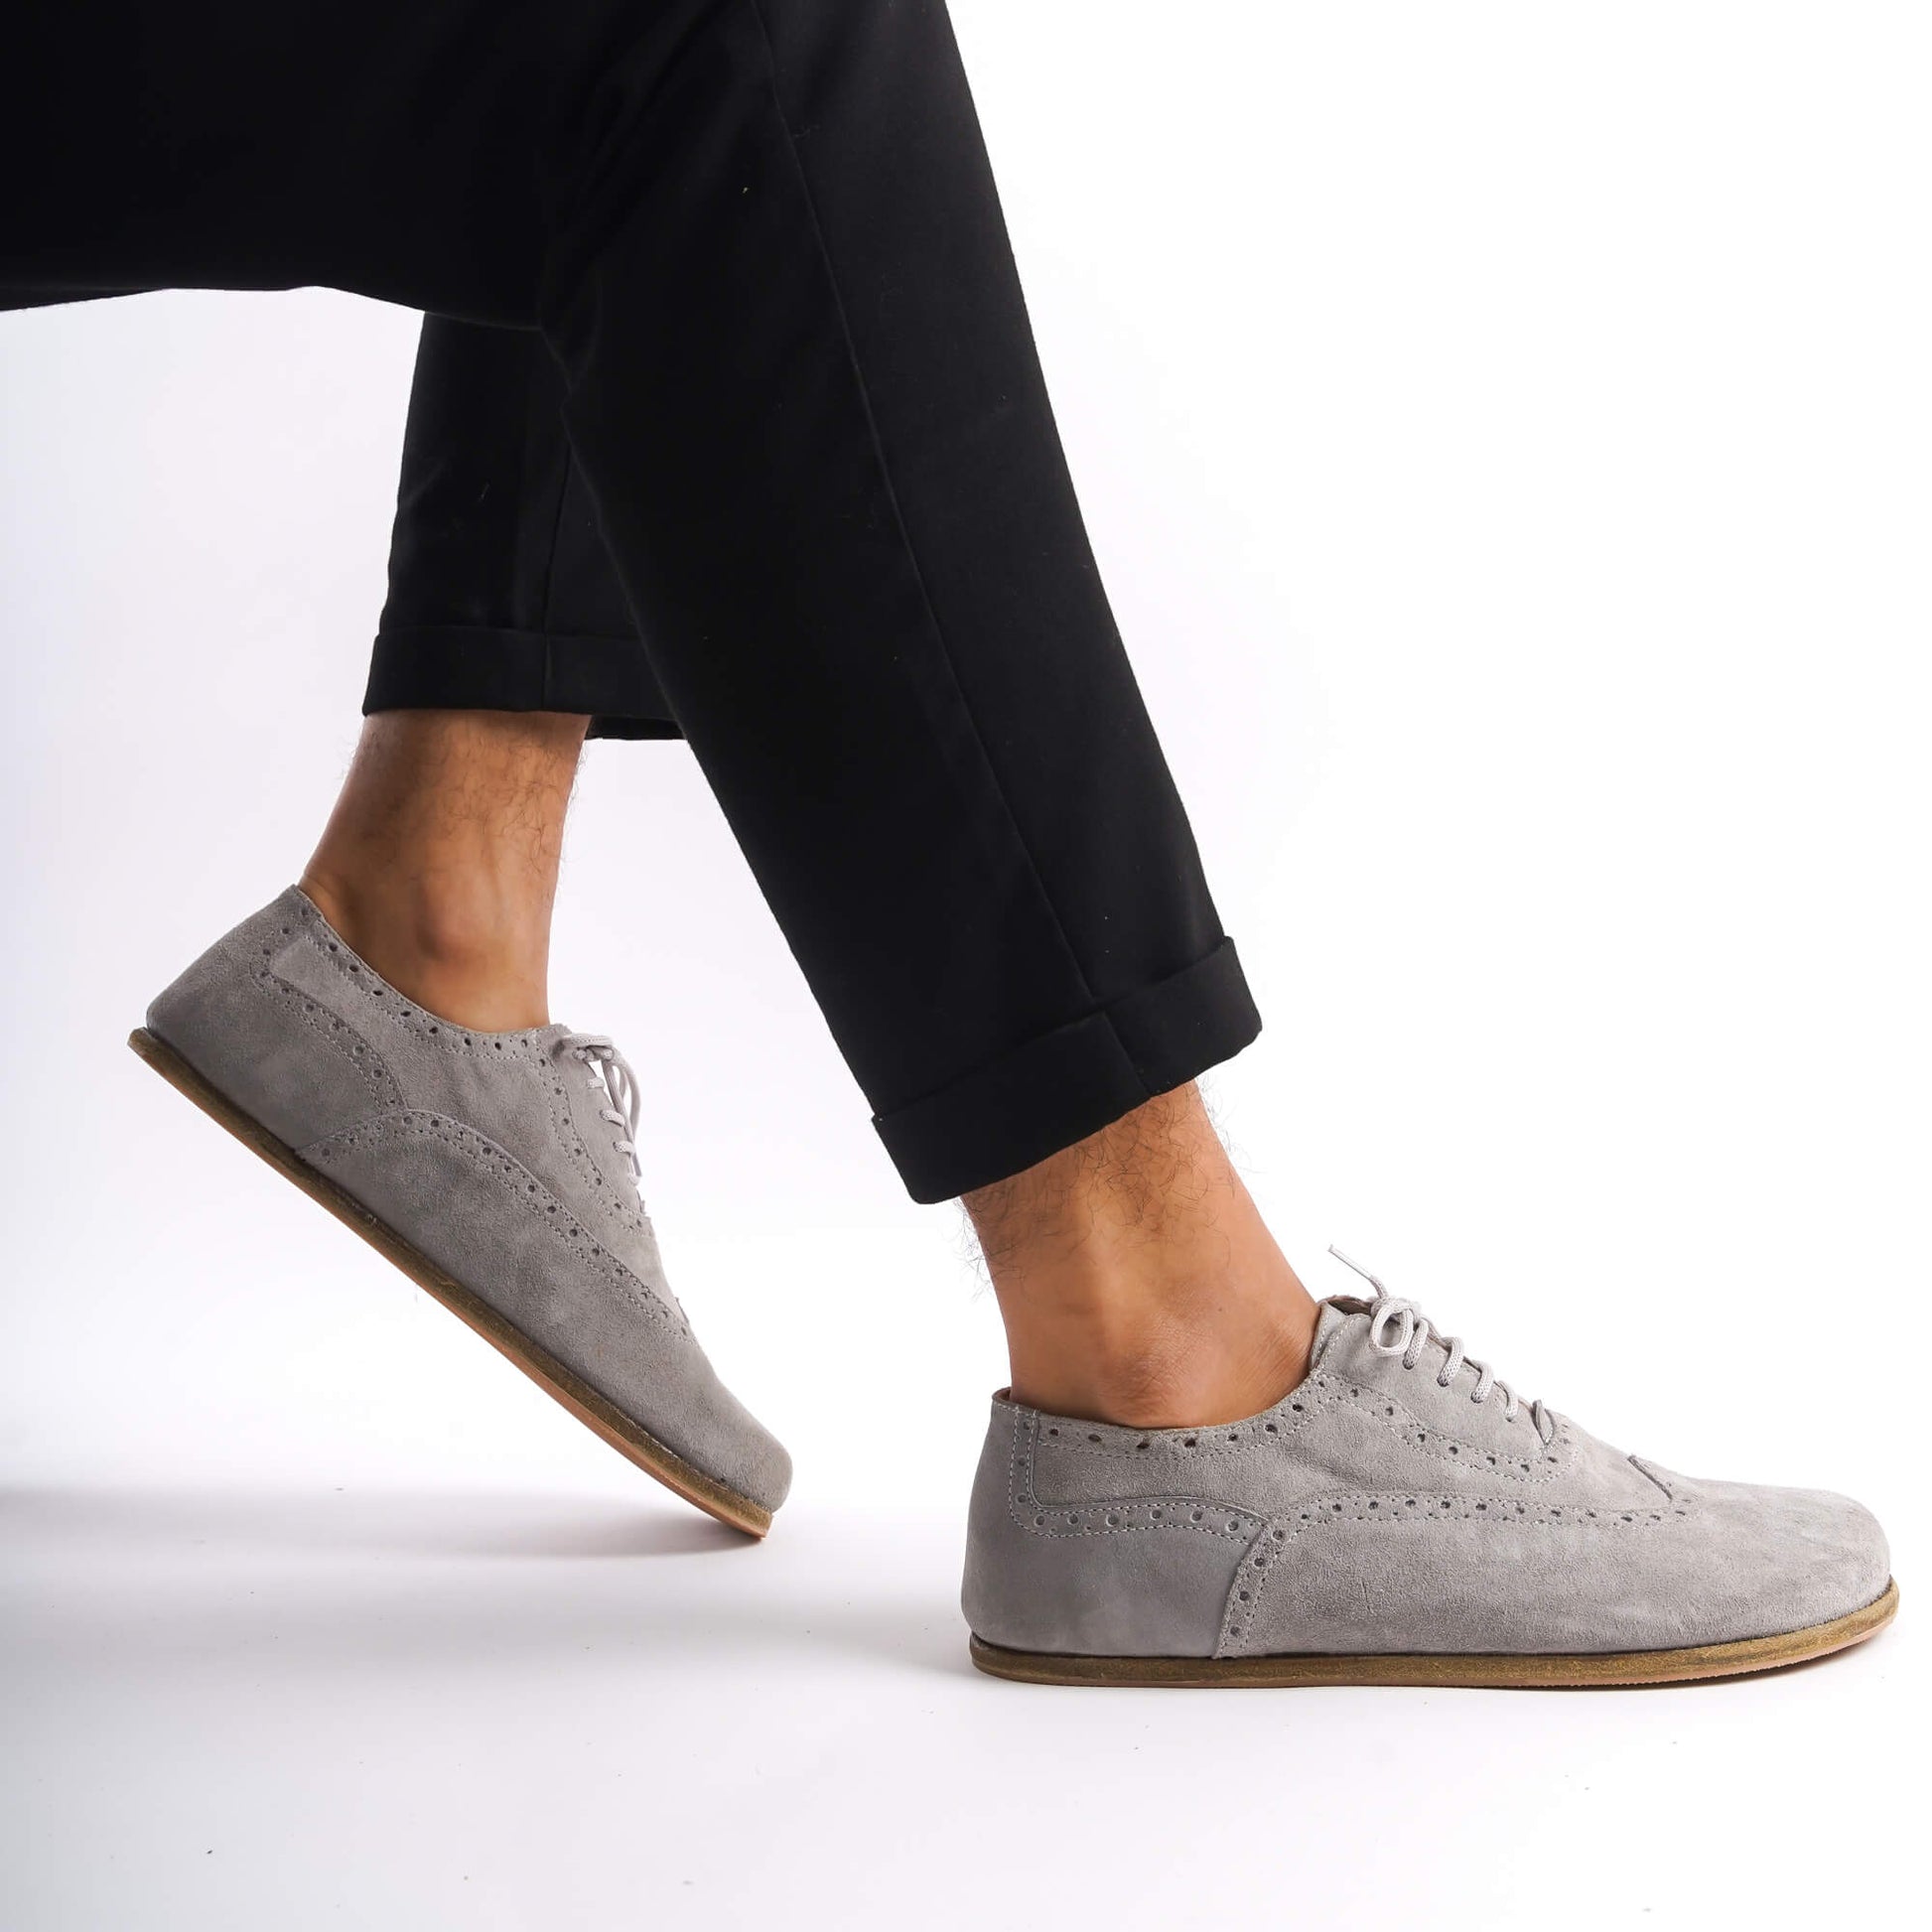 Close-up of gray suede barefoot Oxfords showcasing brogue details and natural foot shape.